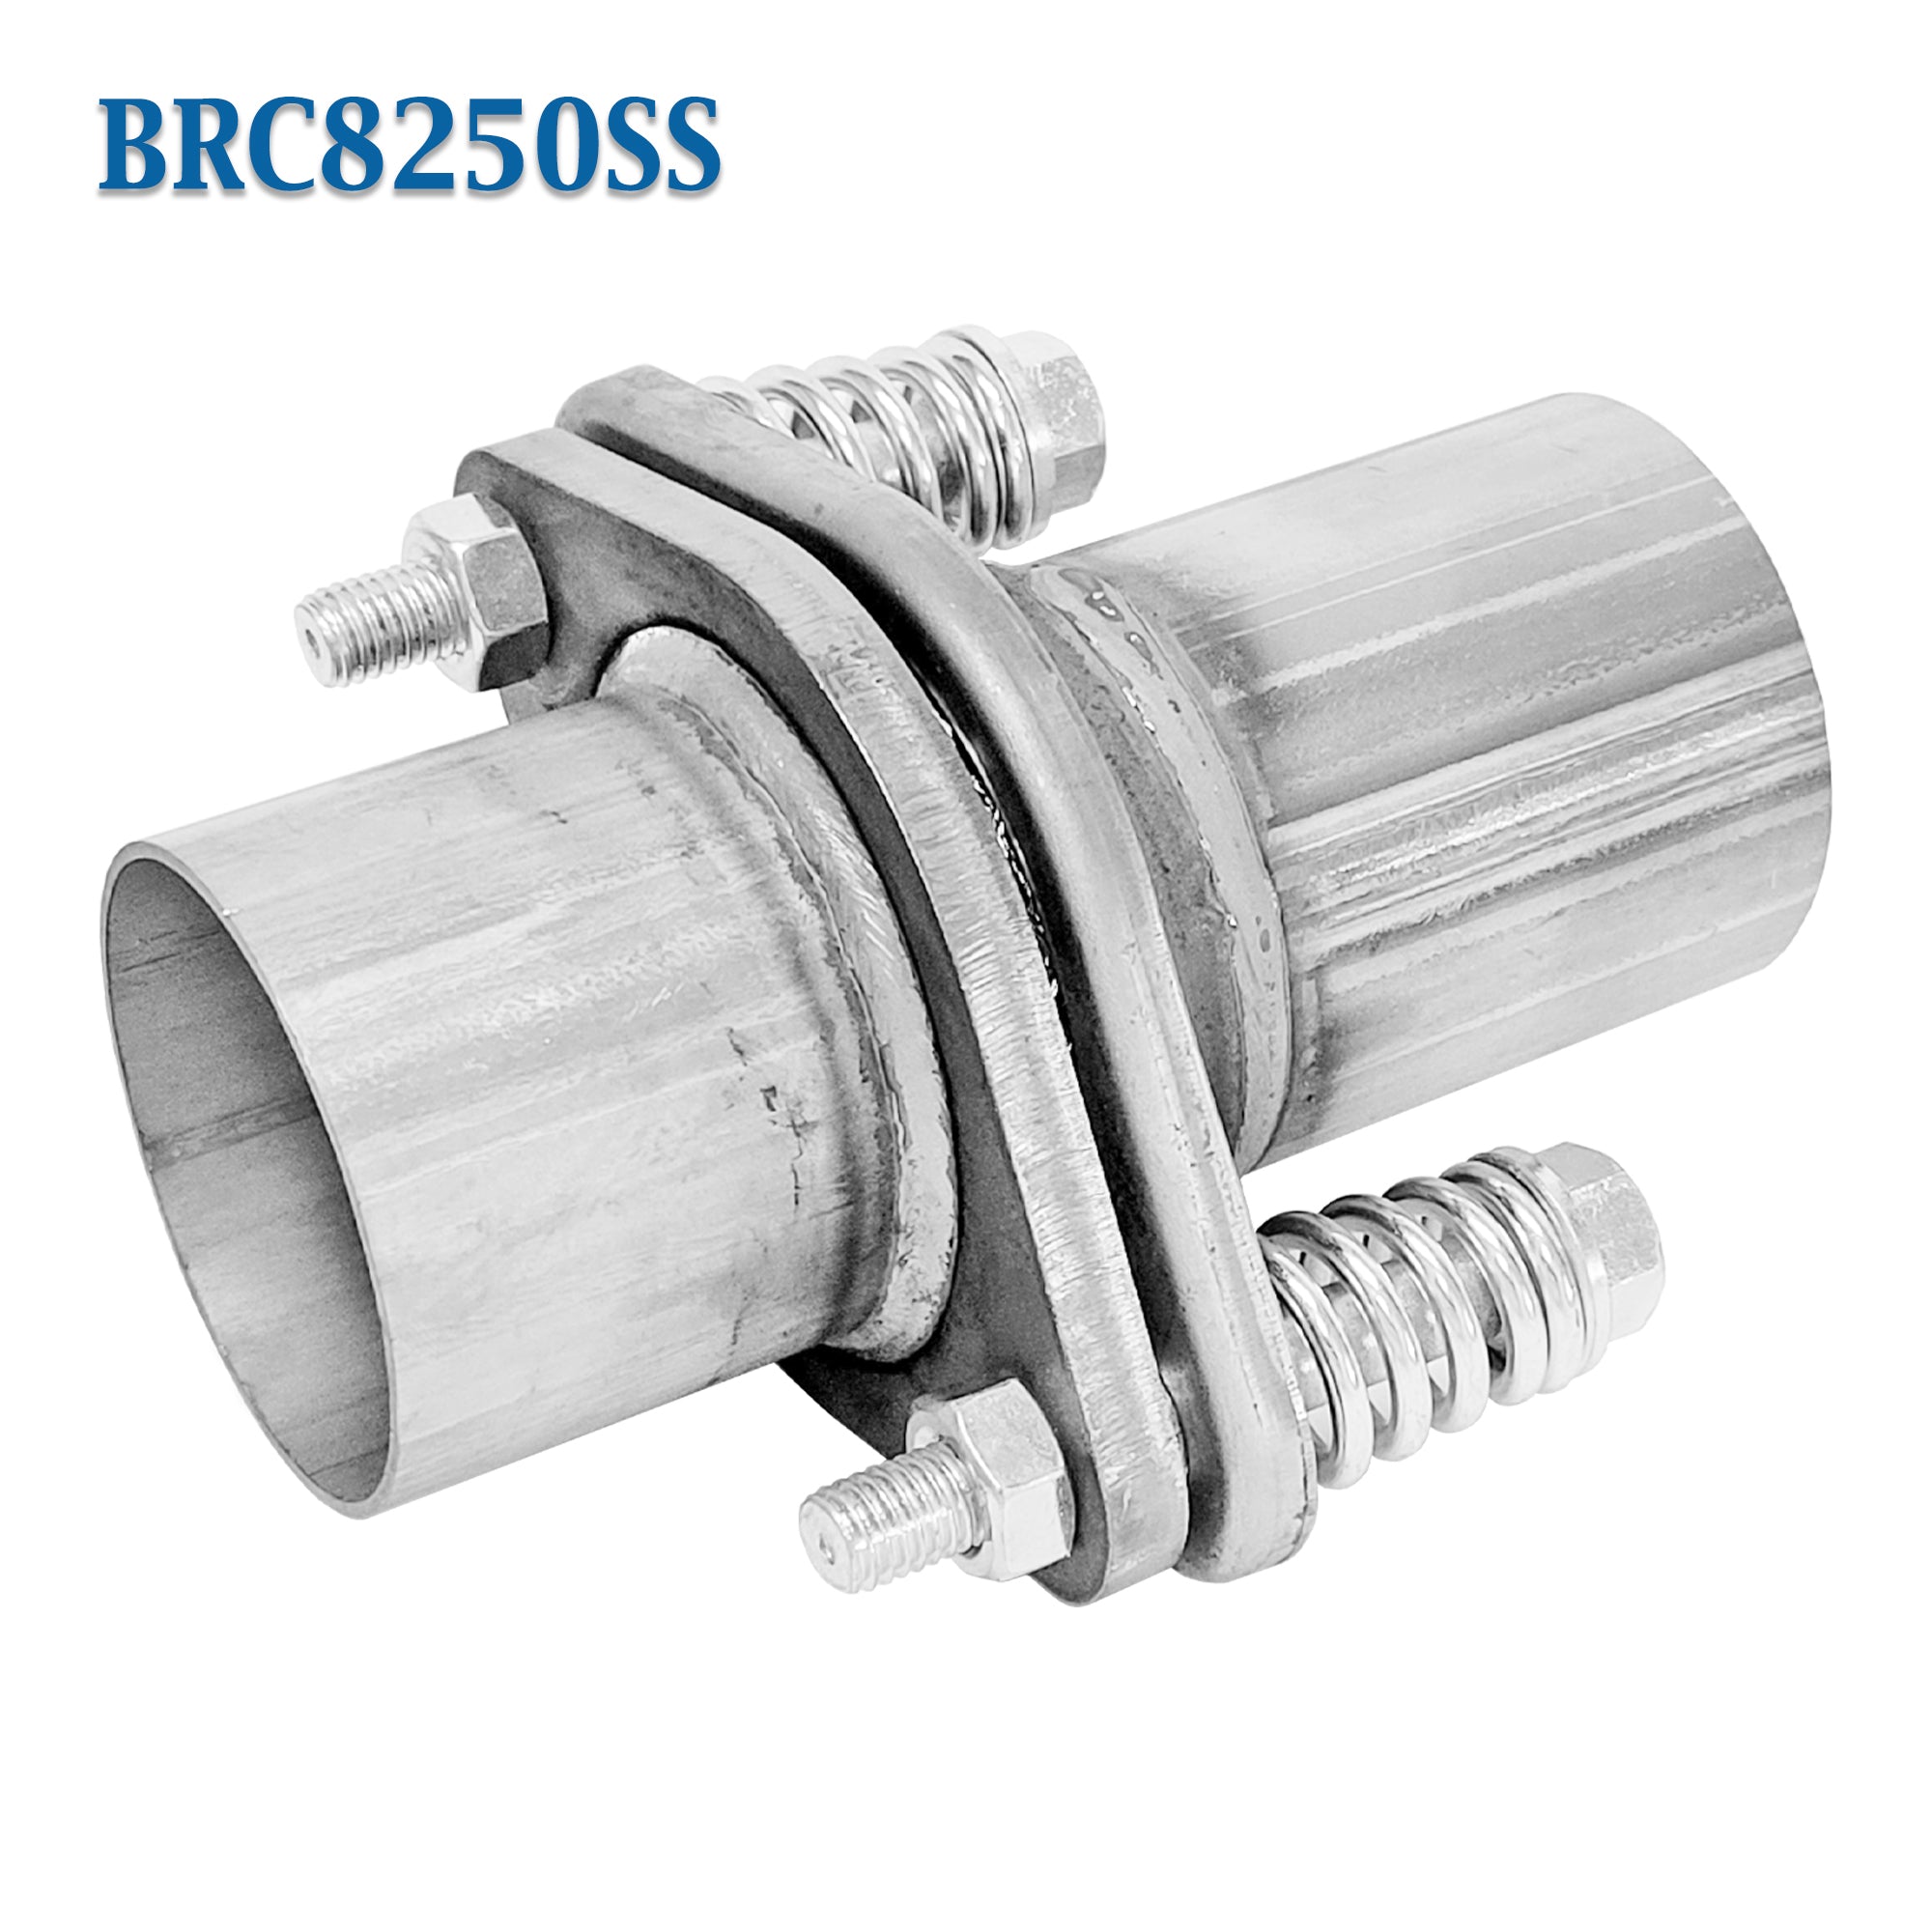 1.5 (1 1/2 in.) x 8 Flex Pipe Exhaust Coupling Quality Stainless Hea –  Bear River Converters